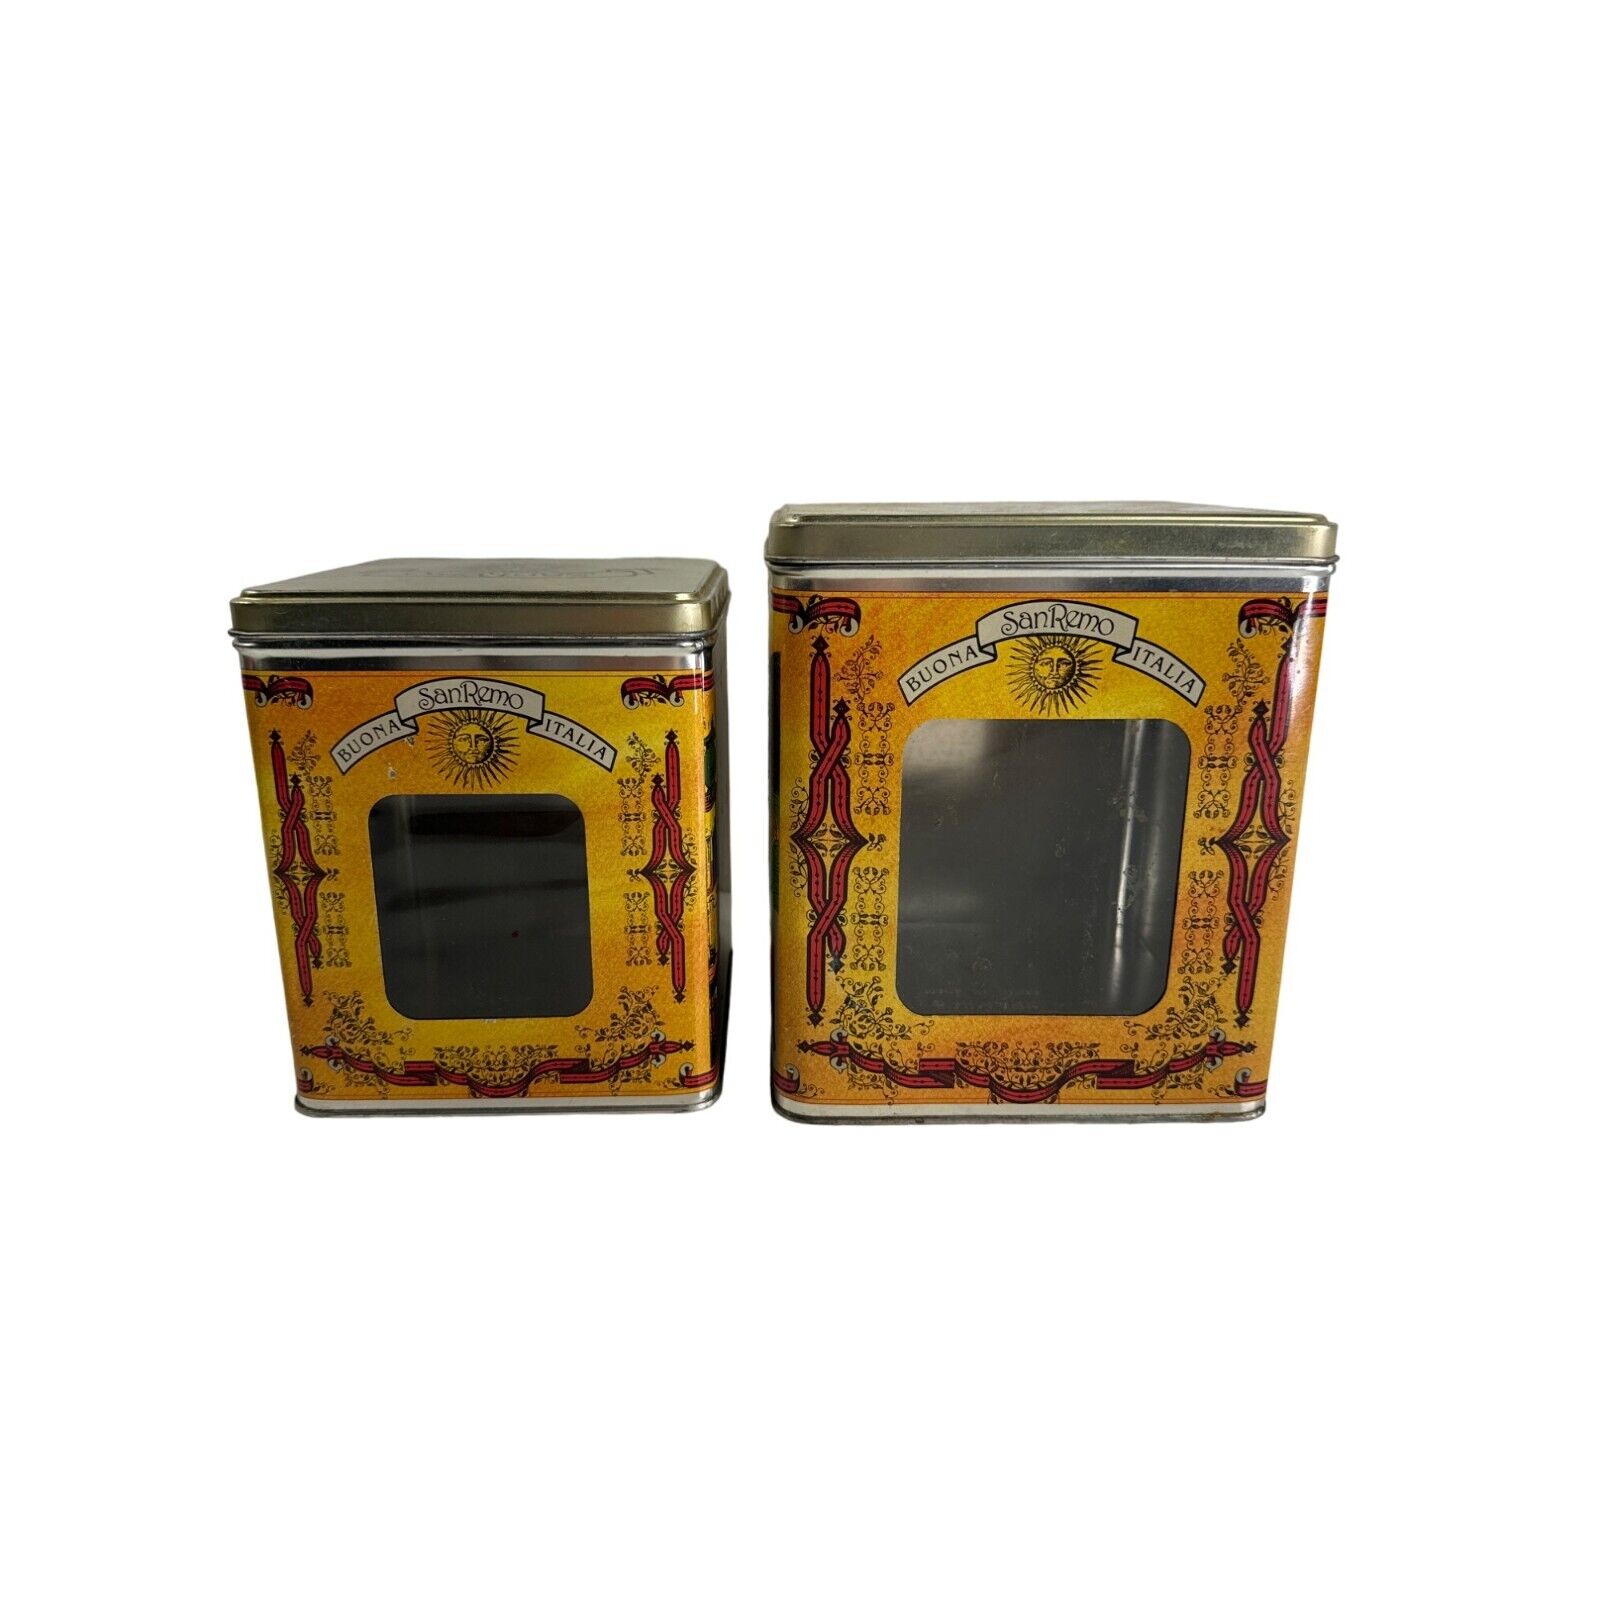 San Remo Italiano 2-piece tin / canister set w/ window in each tin